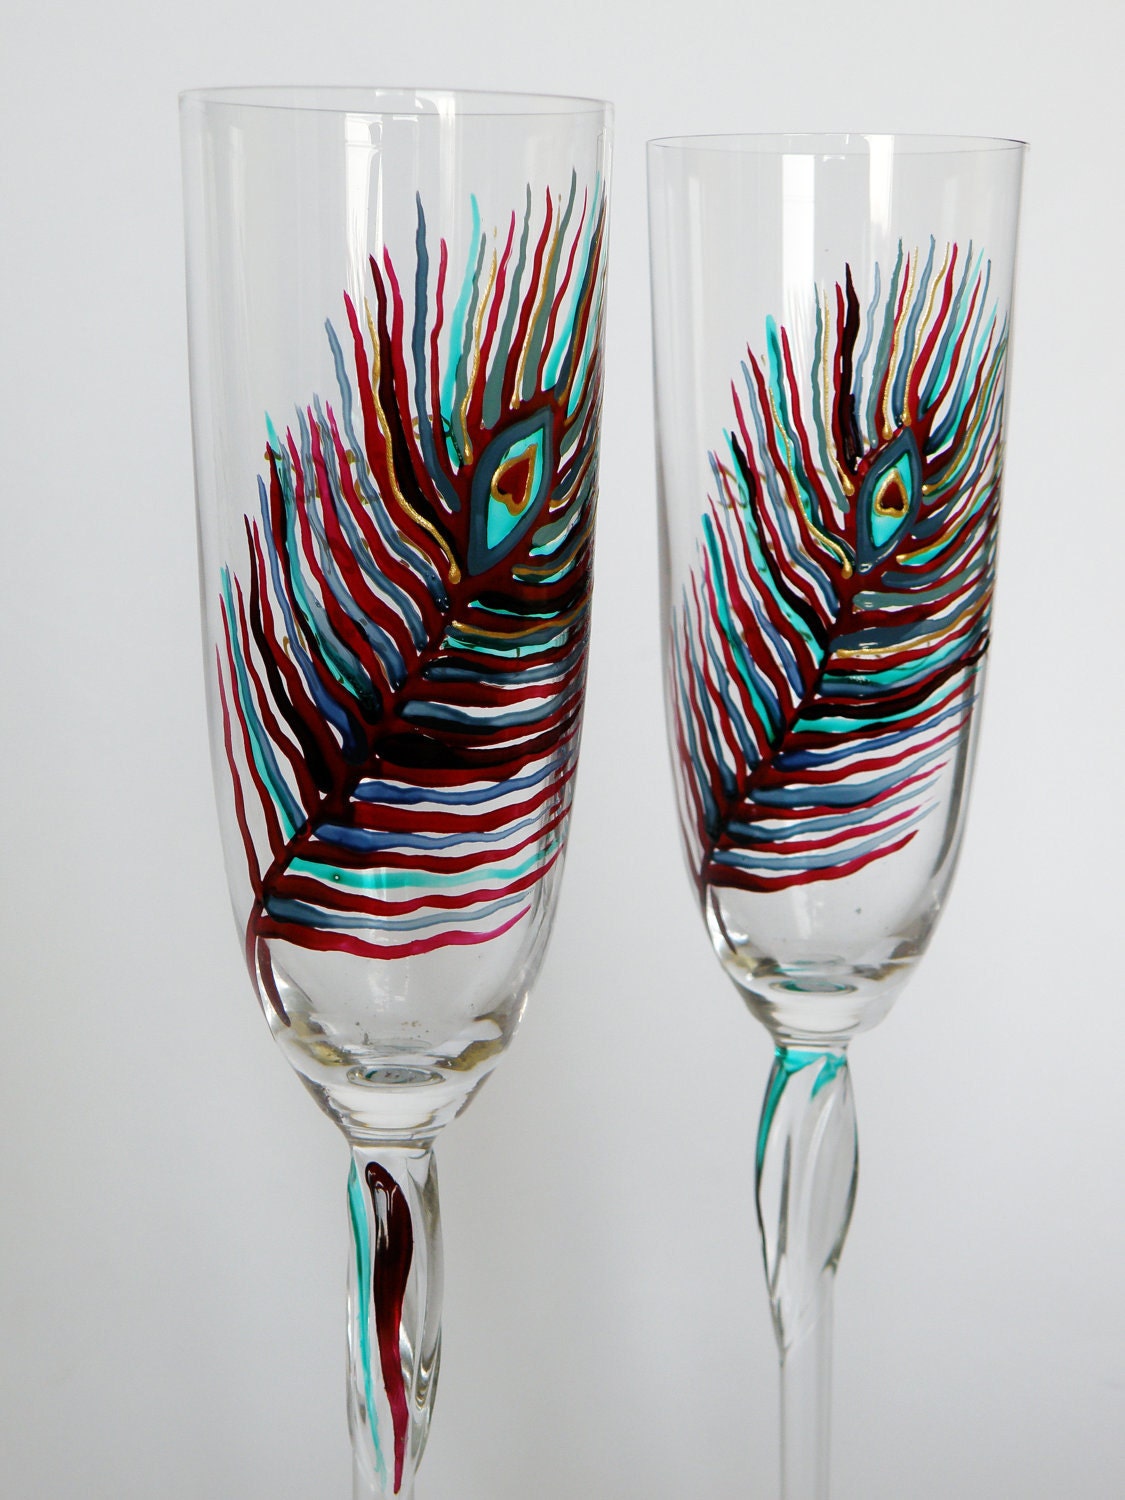  of 2 Personalized Champagne glasses Peacock Feather Dark purple and Teal